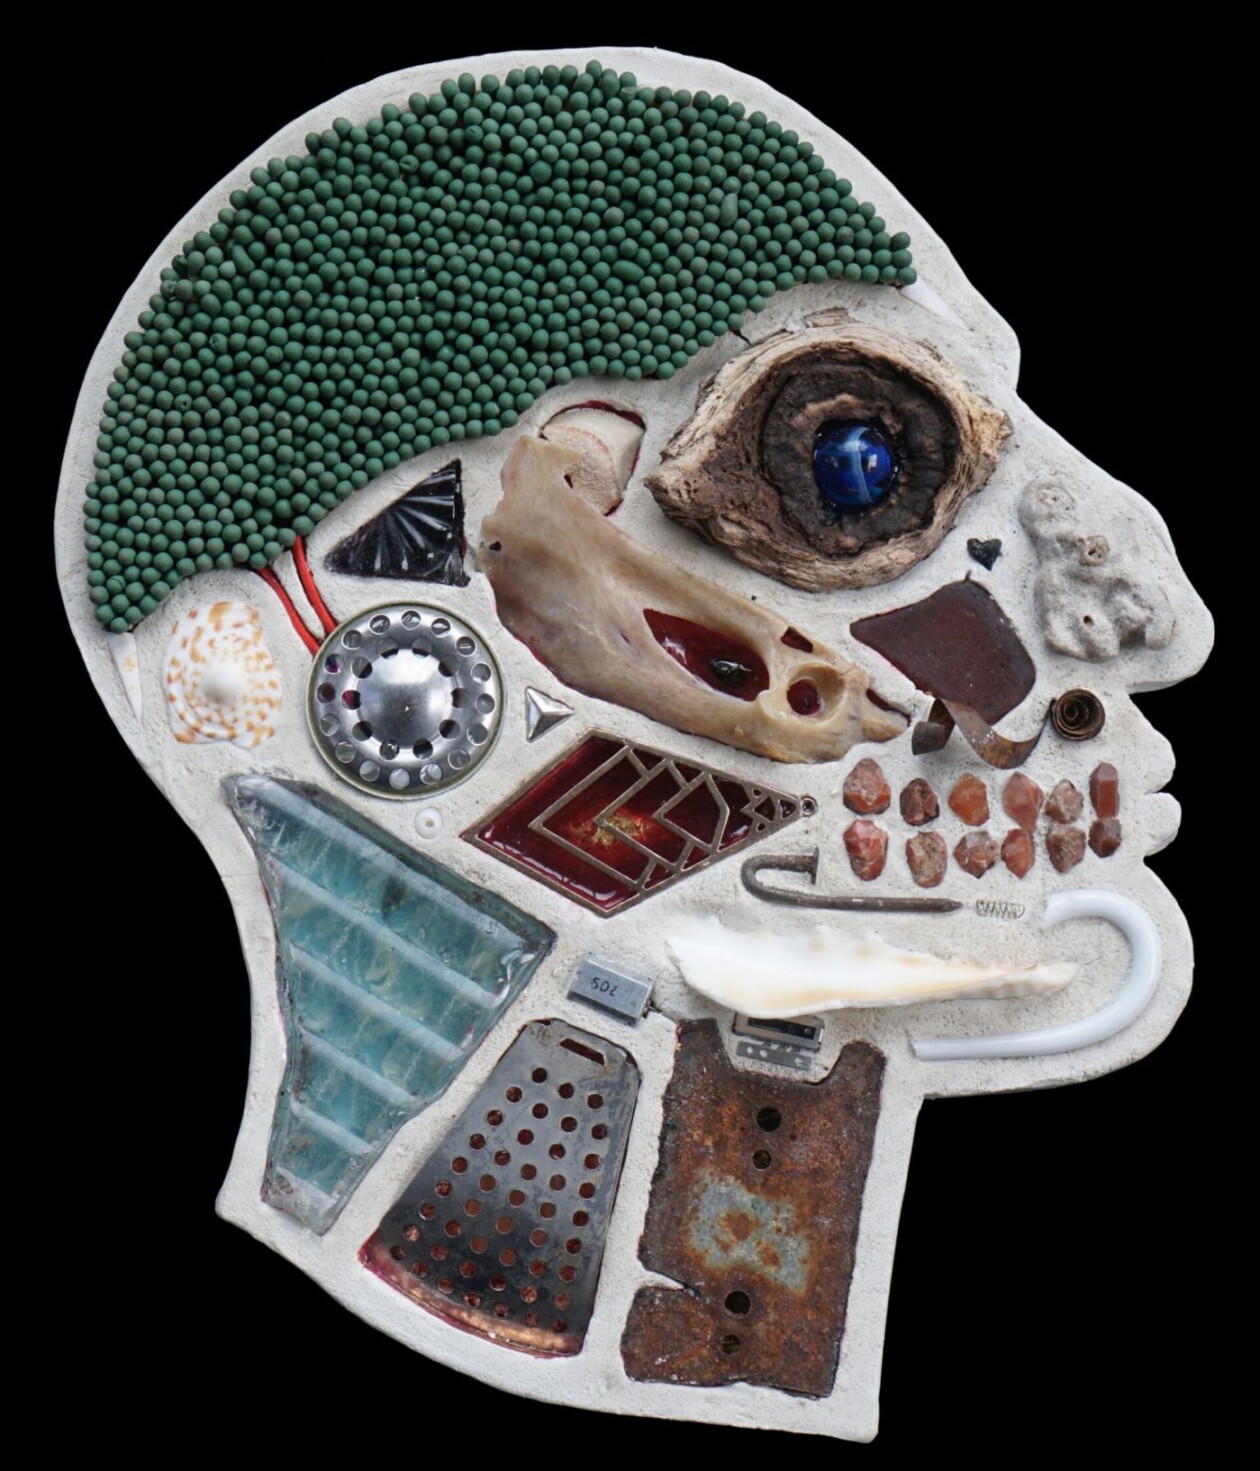 Assemblage Sculptures Of Anatomical Human Head Cross Sections By Edwige Massart And Xavier Wynn (13)